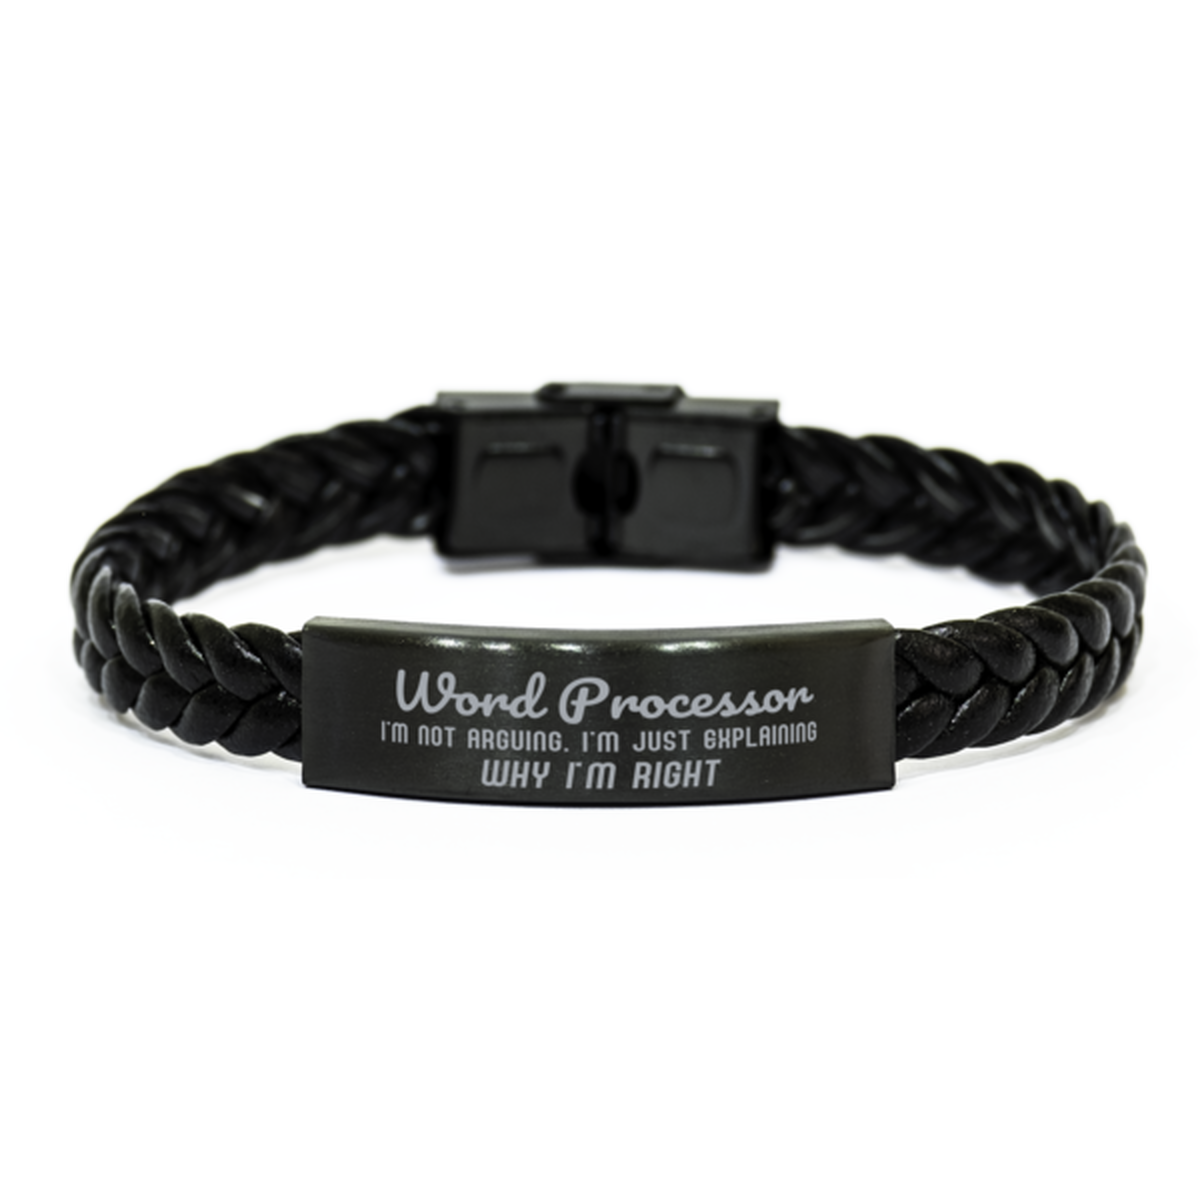 Word Processor I'm not Arguing. I'm Just Explaining Why I'm RIGHT Braided Leather Bracelet, Graduation Birthday Christmas Word Processor Gifts For Word Processor Funny Saying Quote Present for Men Women Coworker